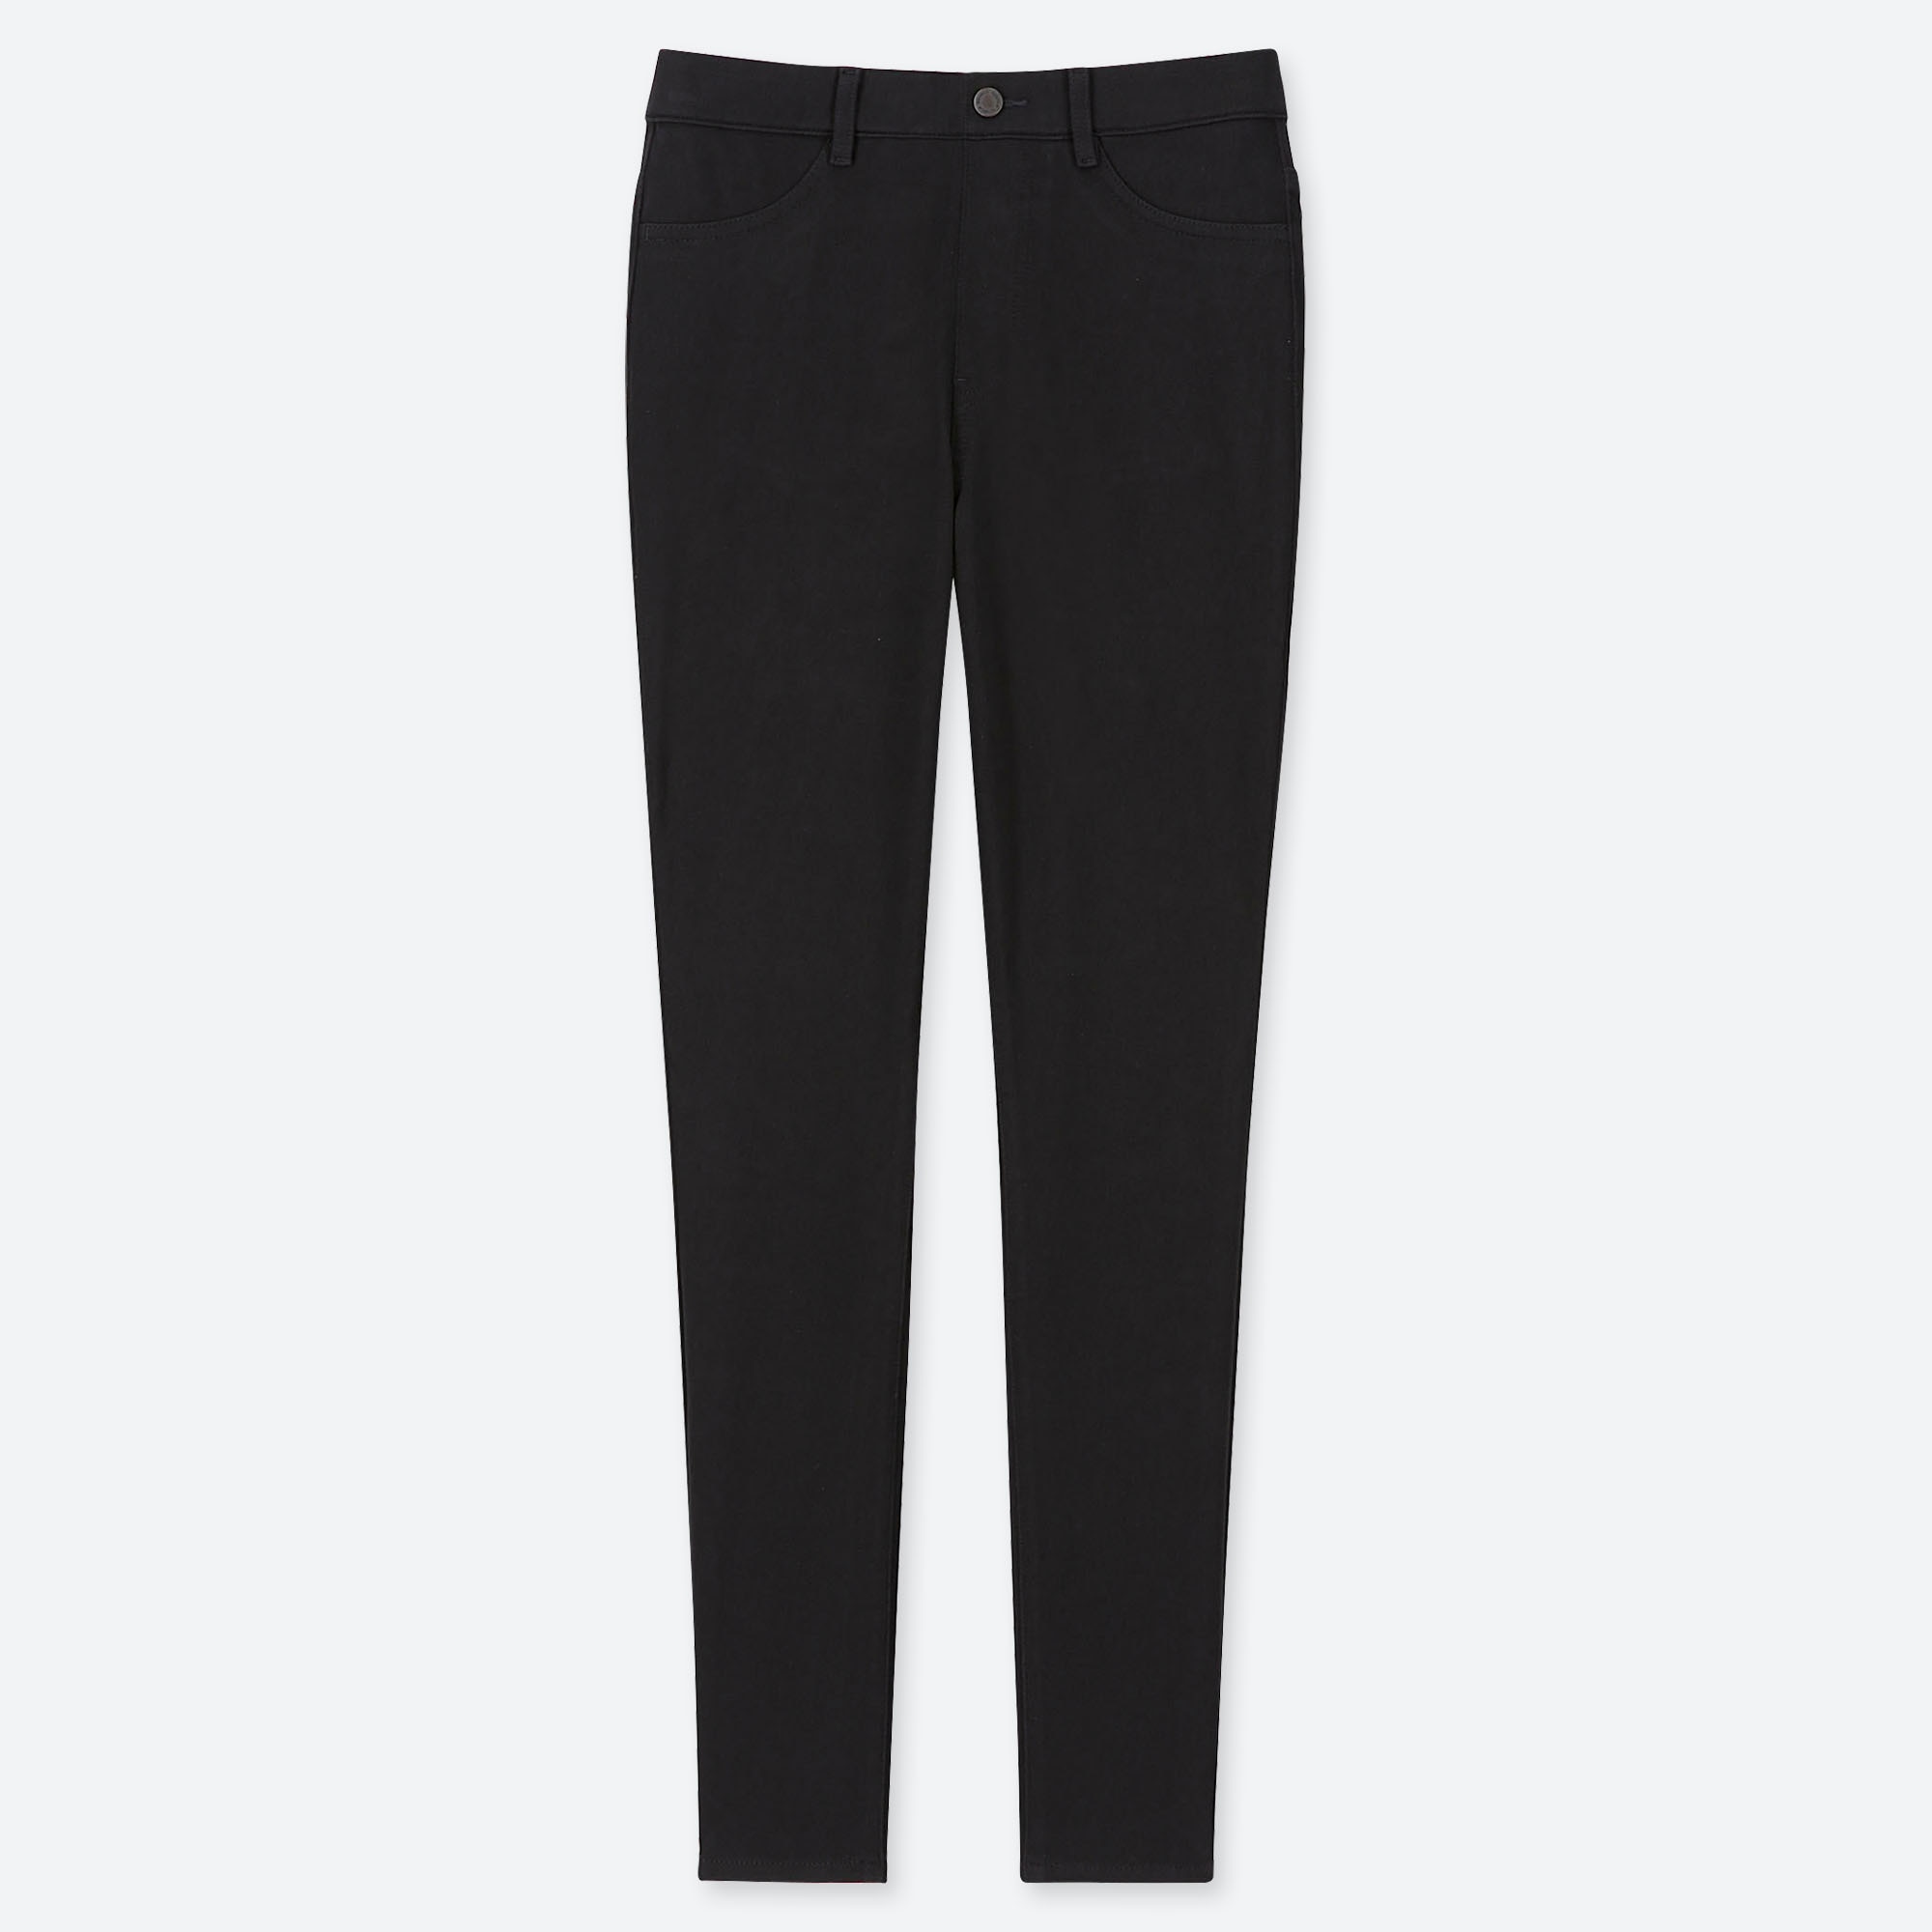 UNIQLO EZY DRY-EX Ultra Stretch Ankle Length Trousers | StyleHint